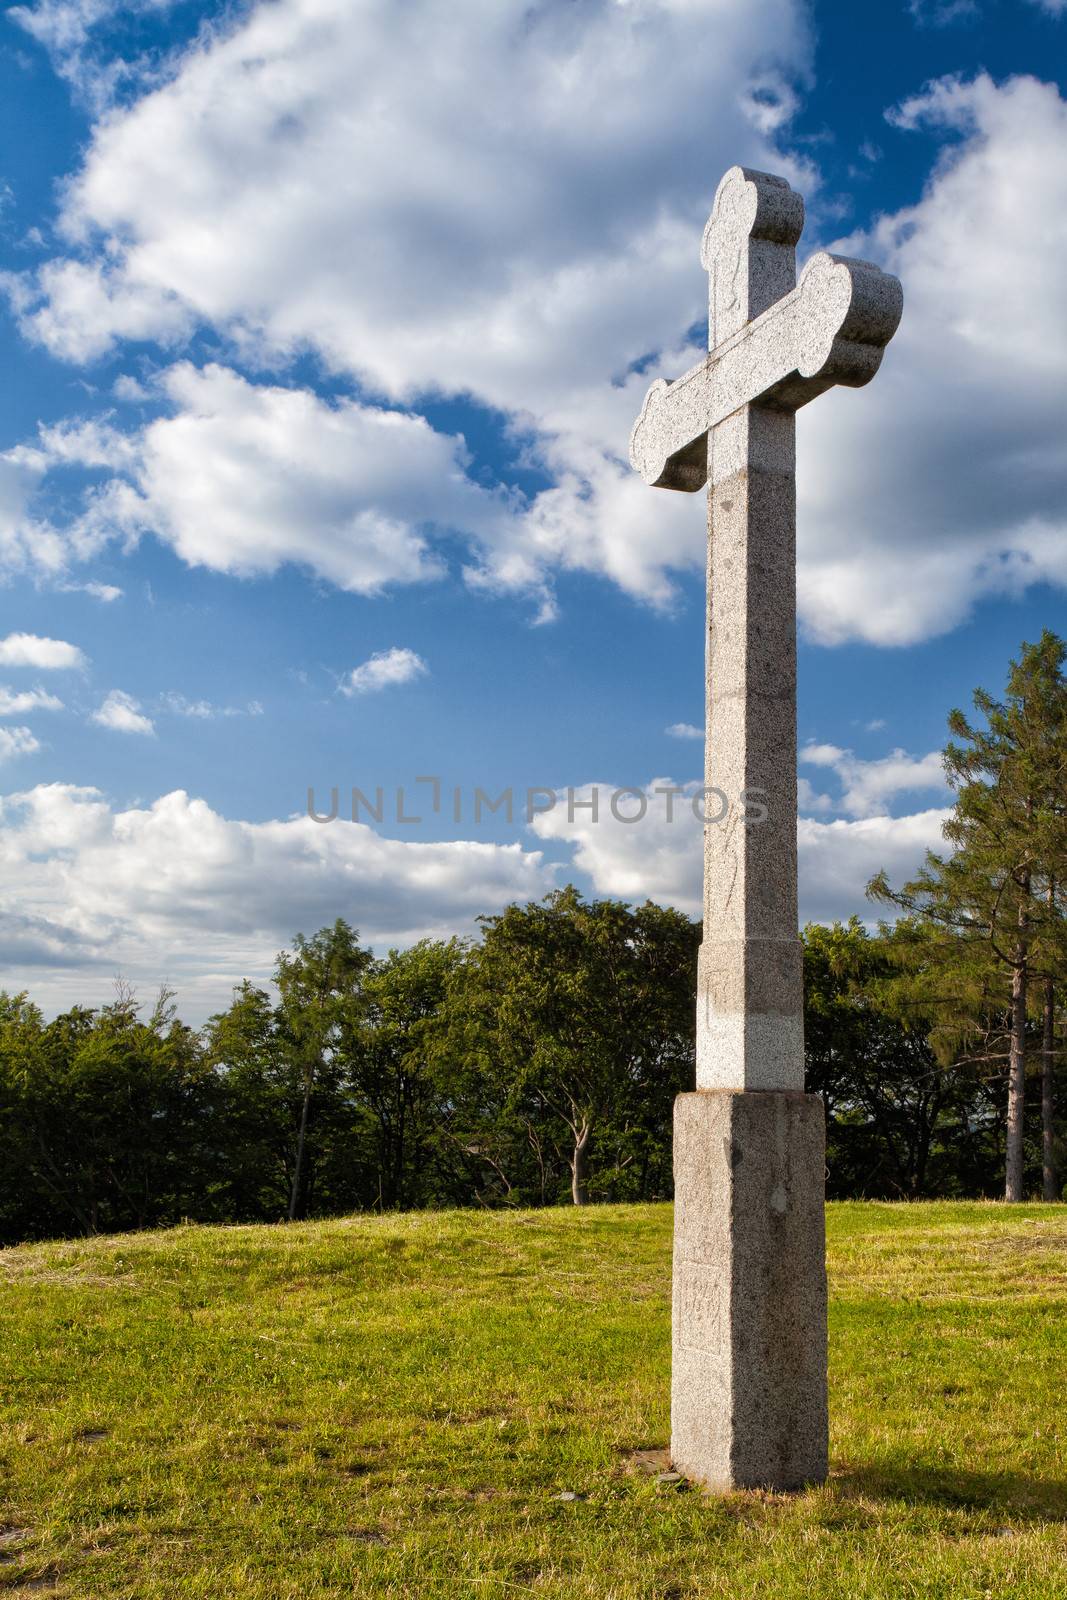 The stone cross on the place of pilgrimage